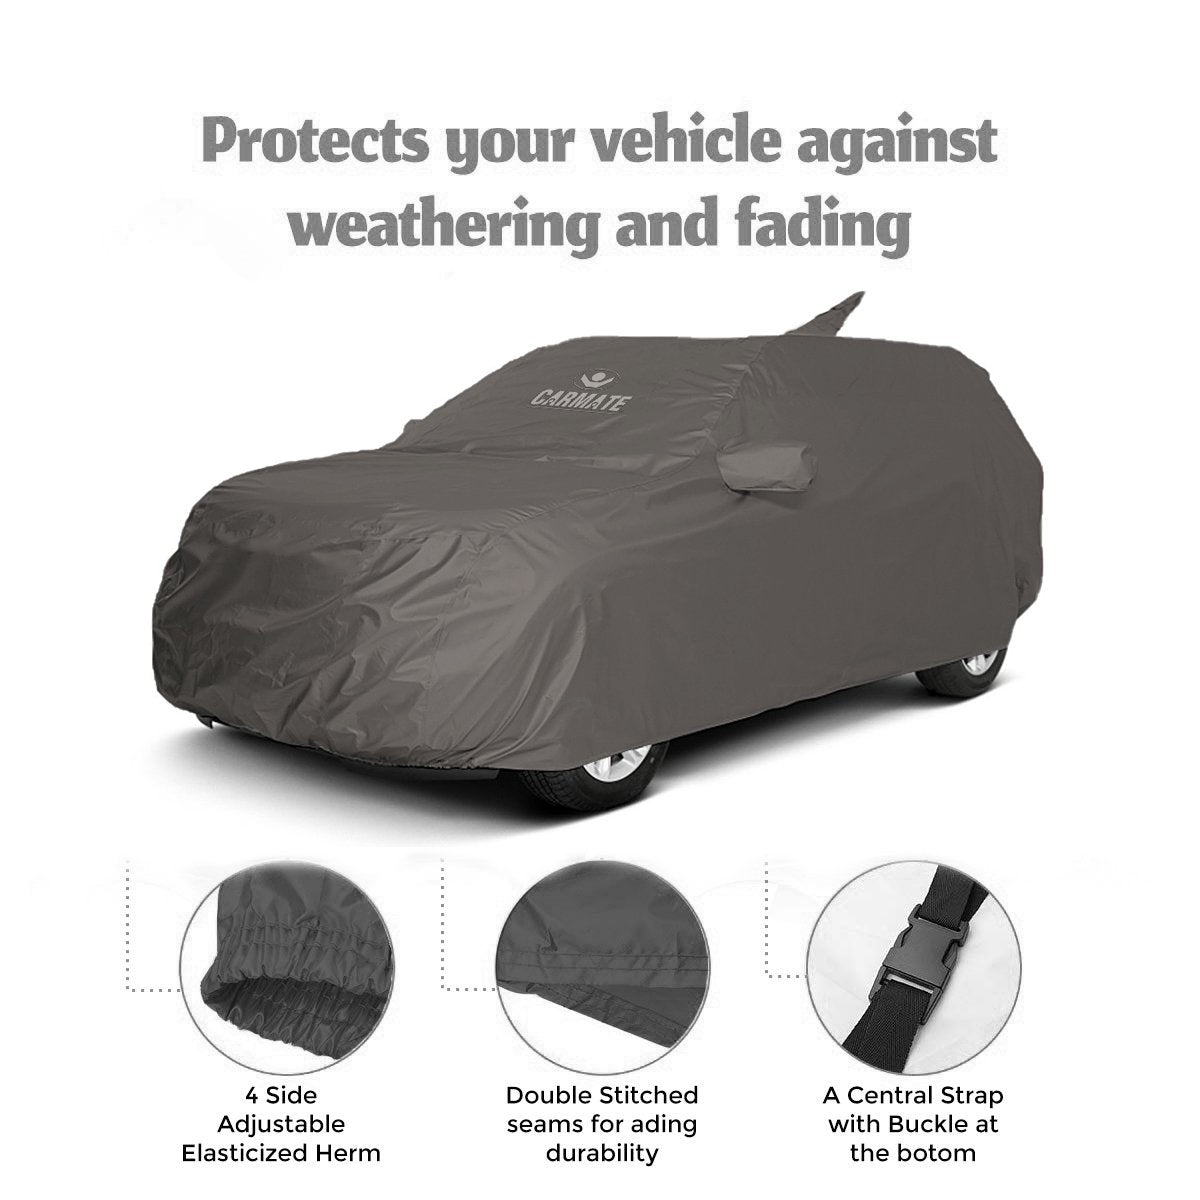 Carmate Car Body Cover 100% Waterproof Pride (Grey) for Toyota - Camry Old - CARMATE®